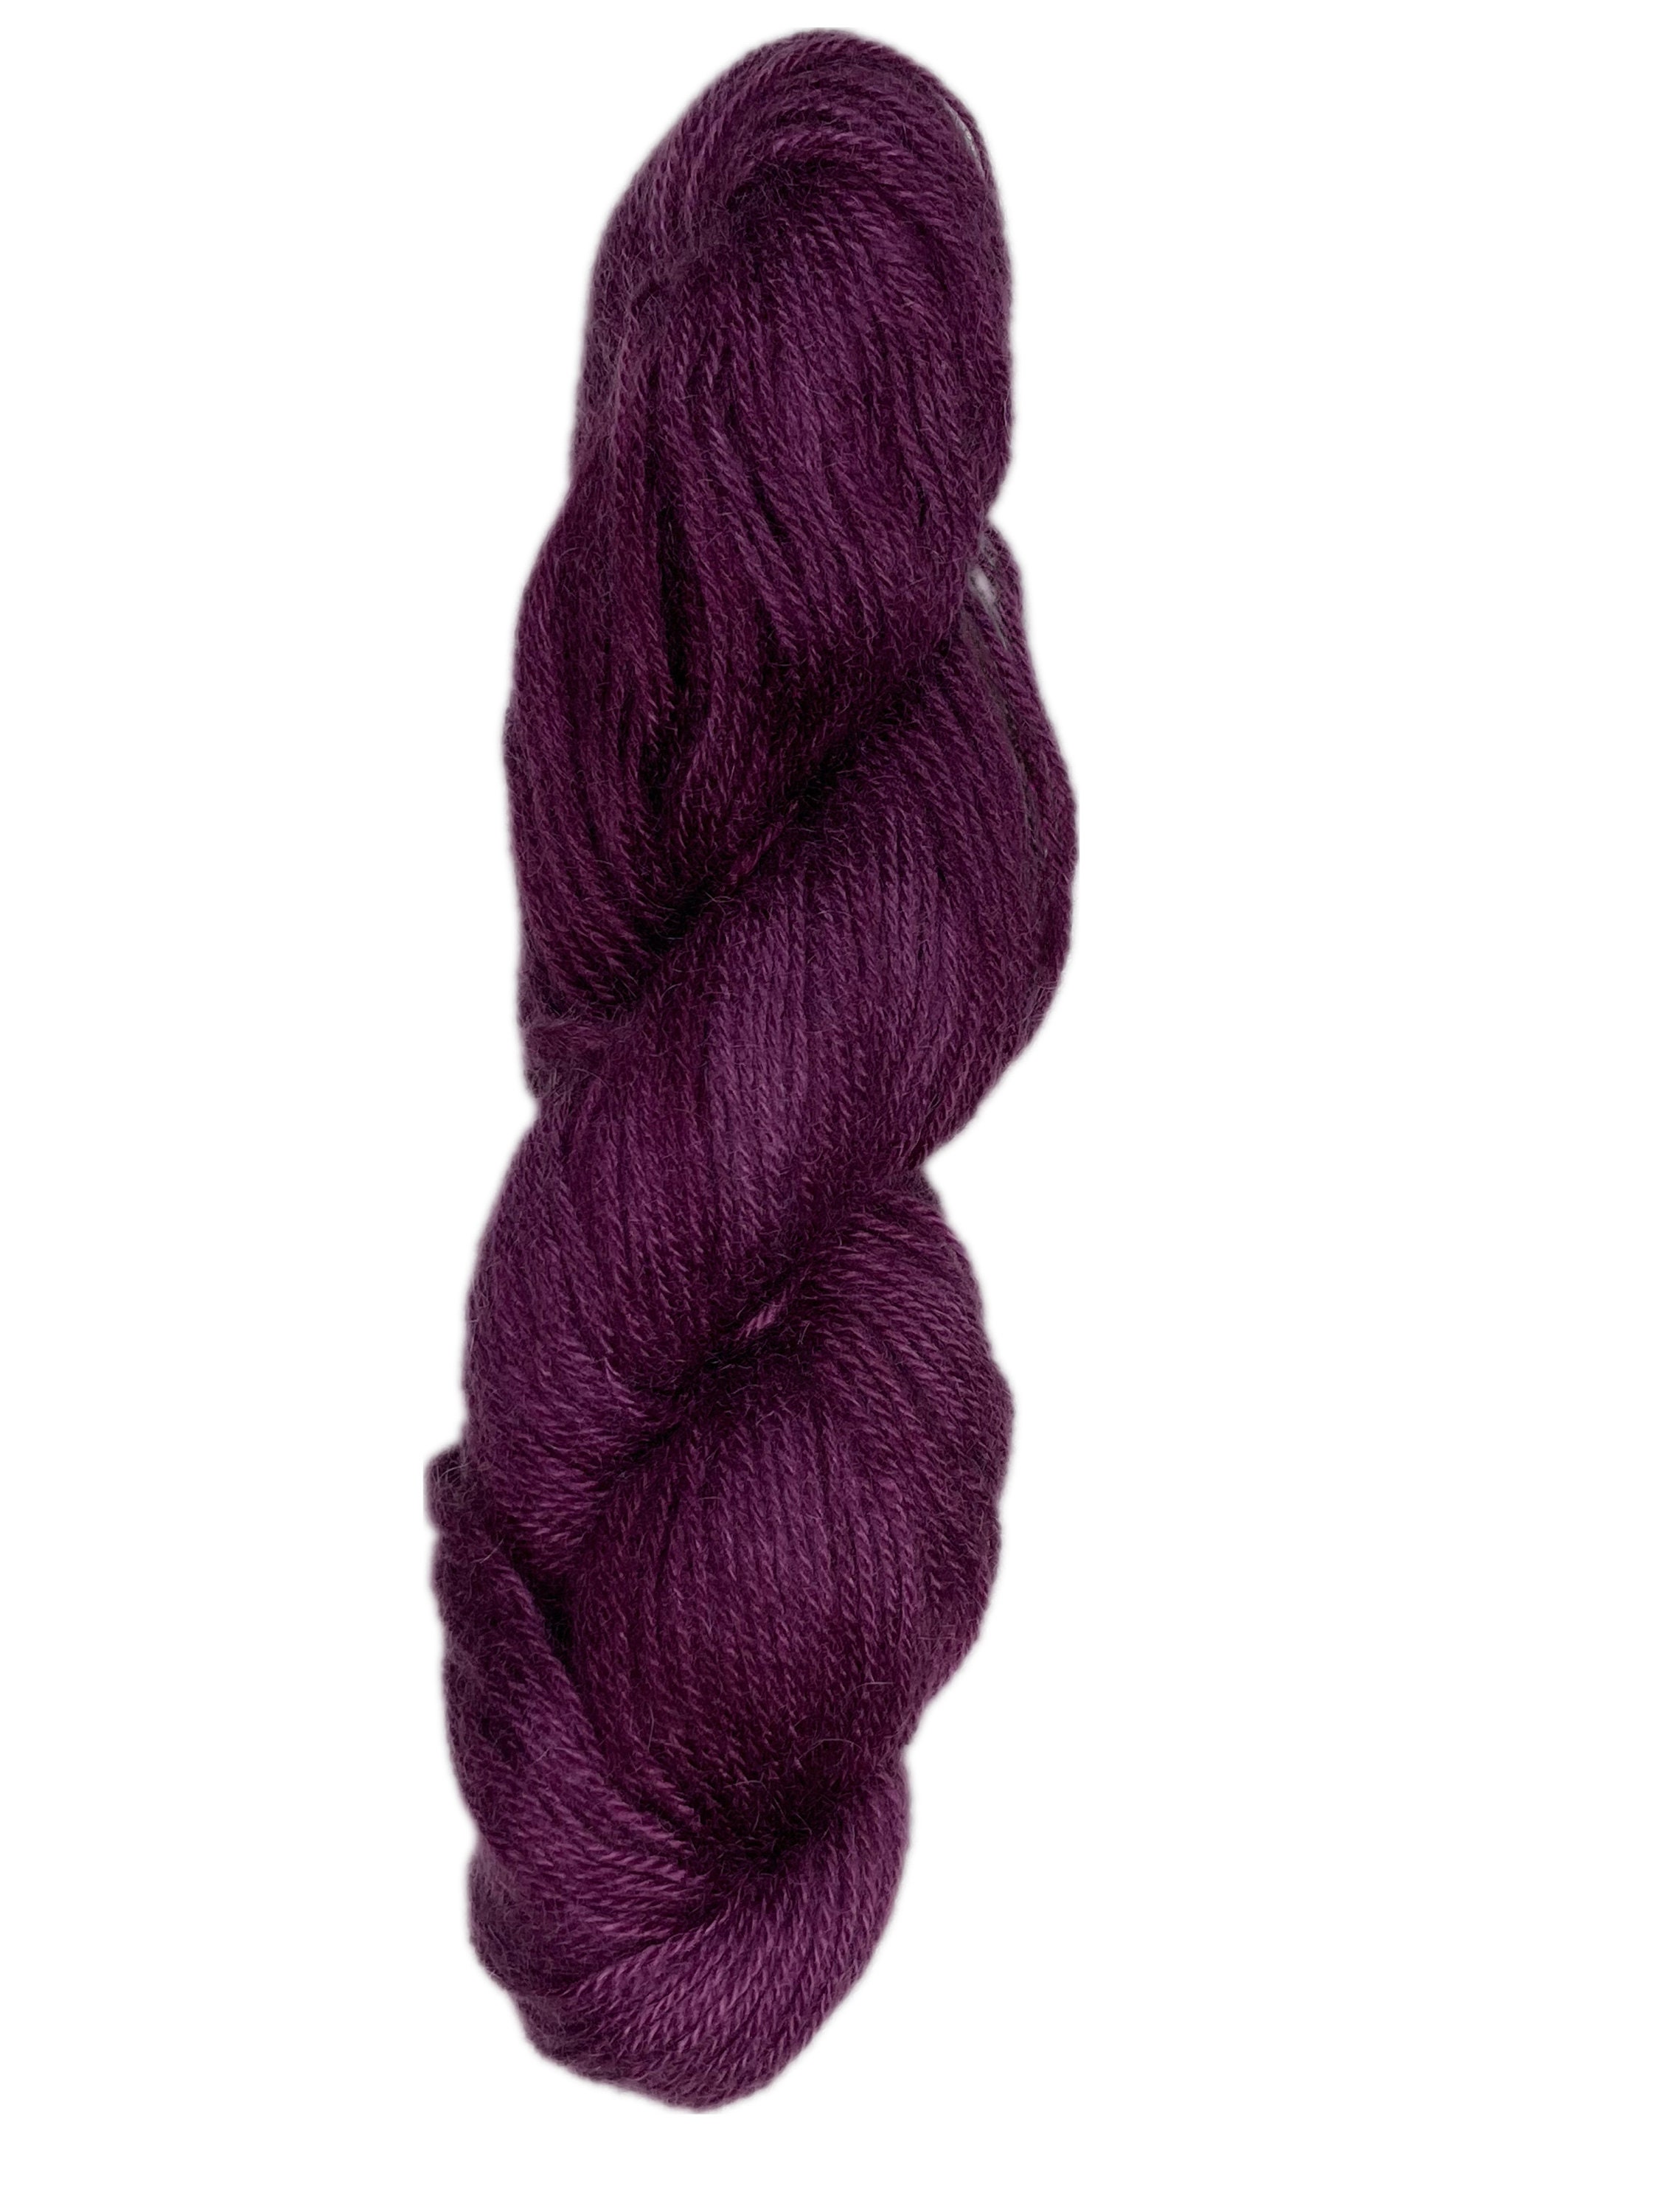 Lion Brand Jiffy Mohair Look Yarn in Mulberry Magenta 3 Ounce Skein -   Australia